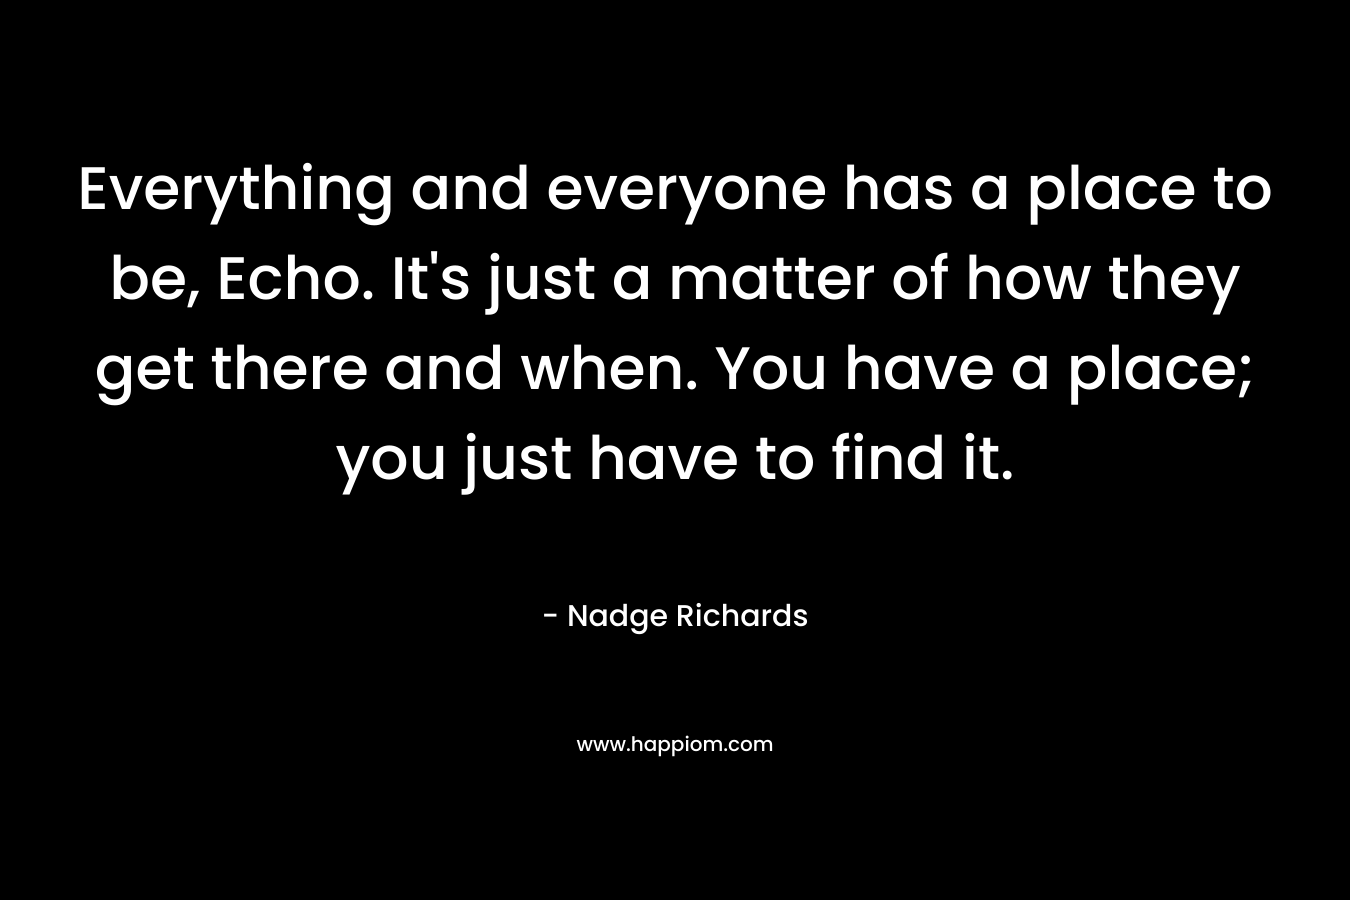 Everything and everyone has a place to be, Echo. It's just a matter of how they get there and when. You have a place; you just have to find it.